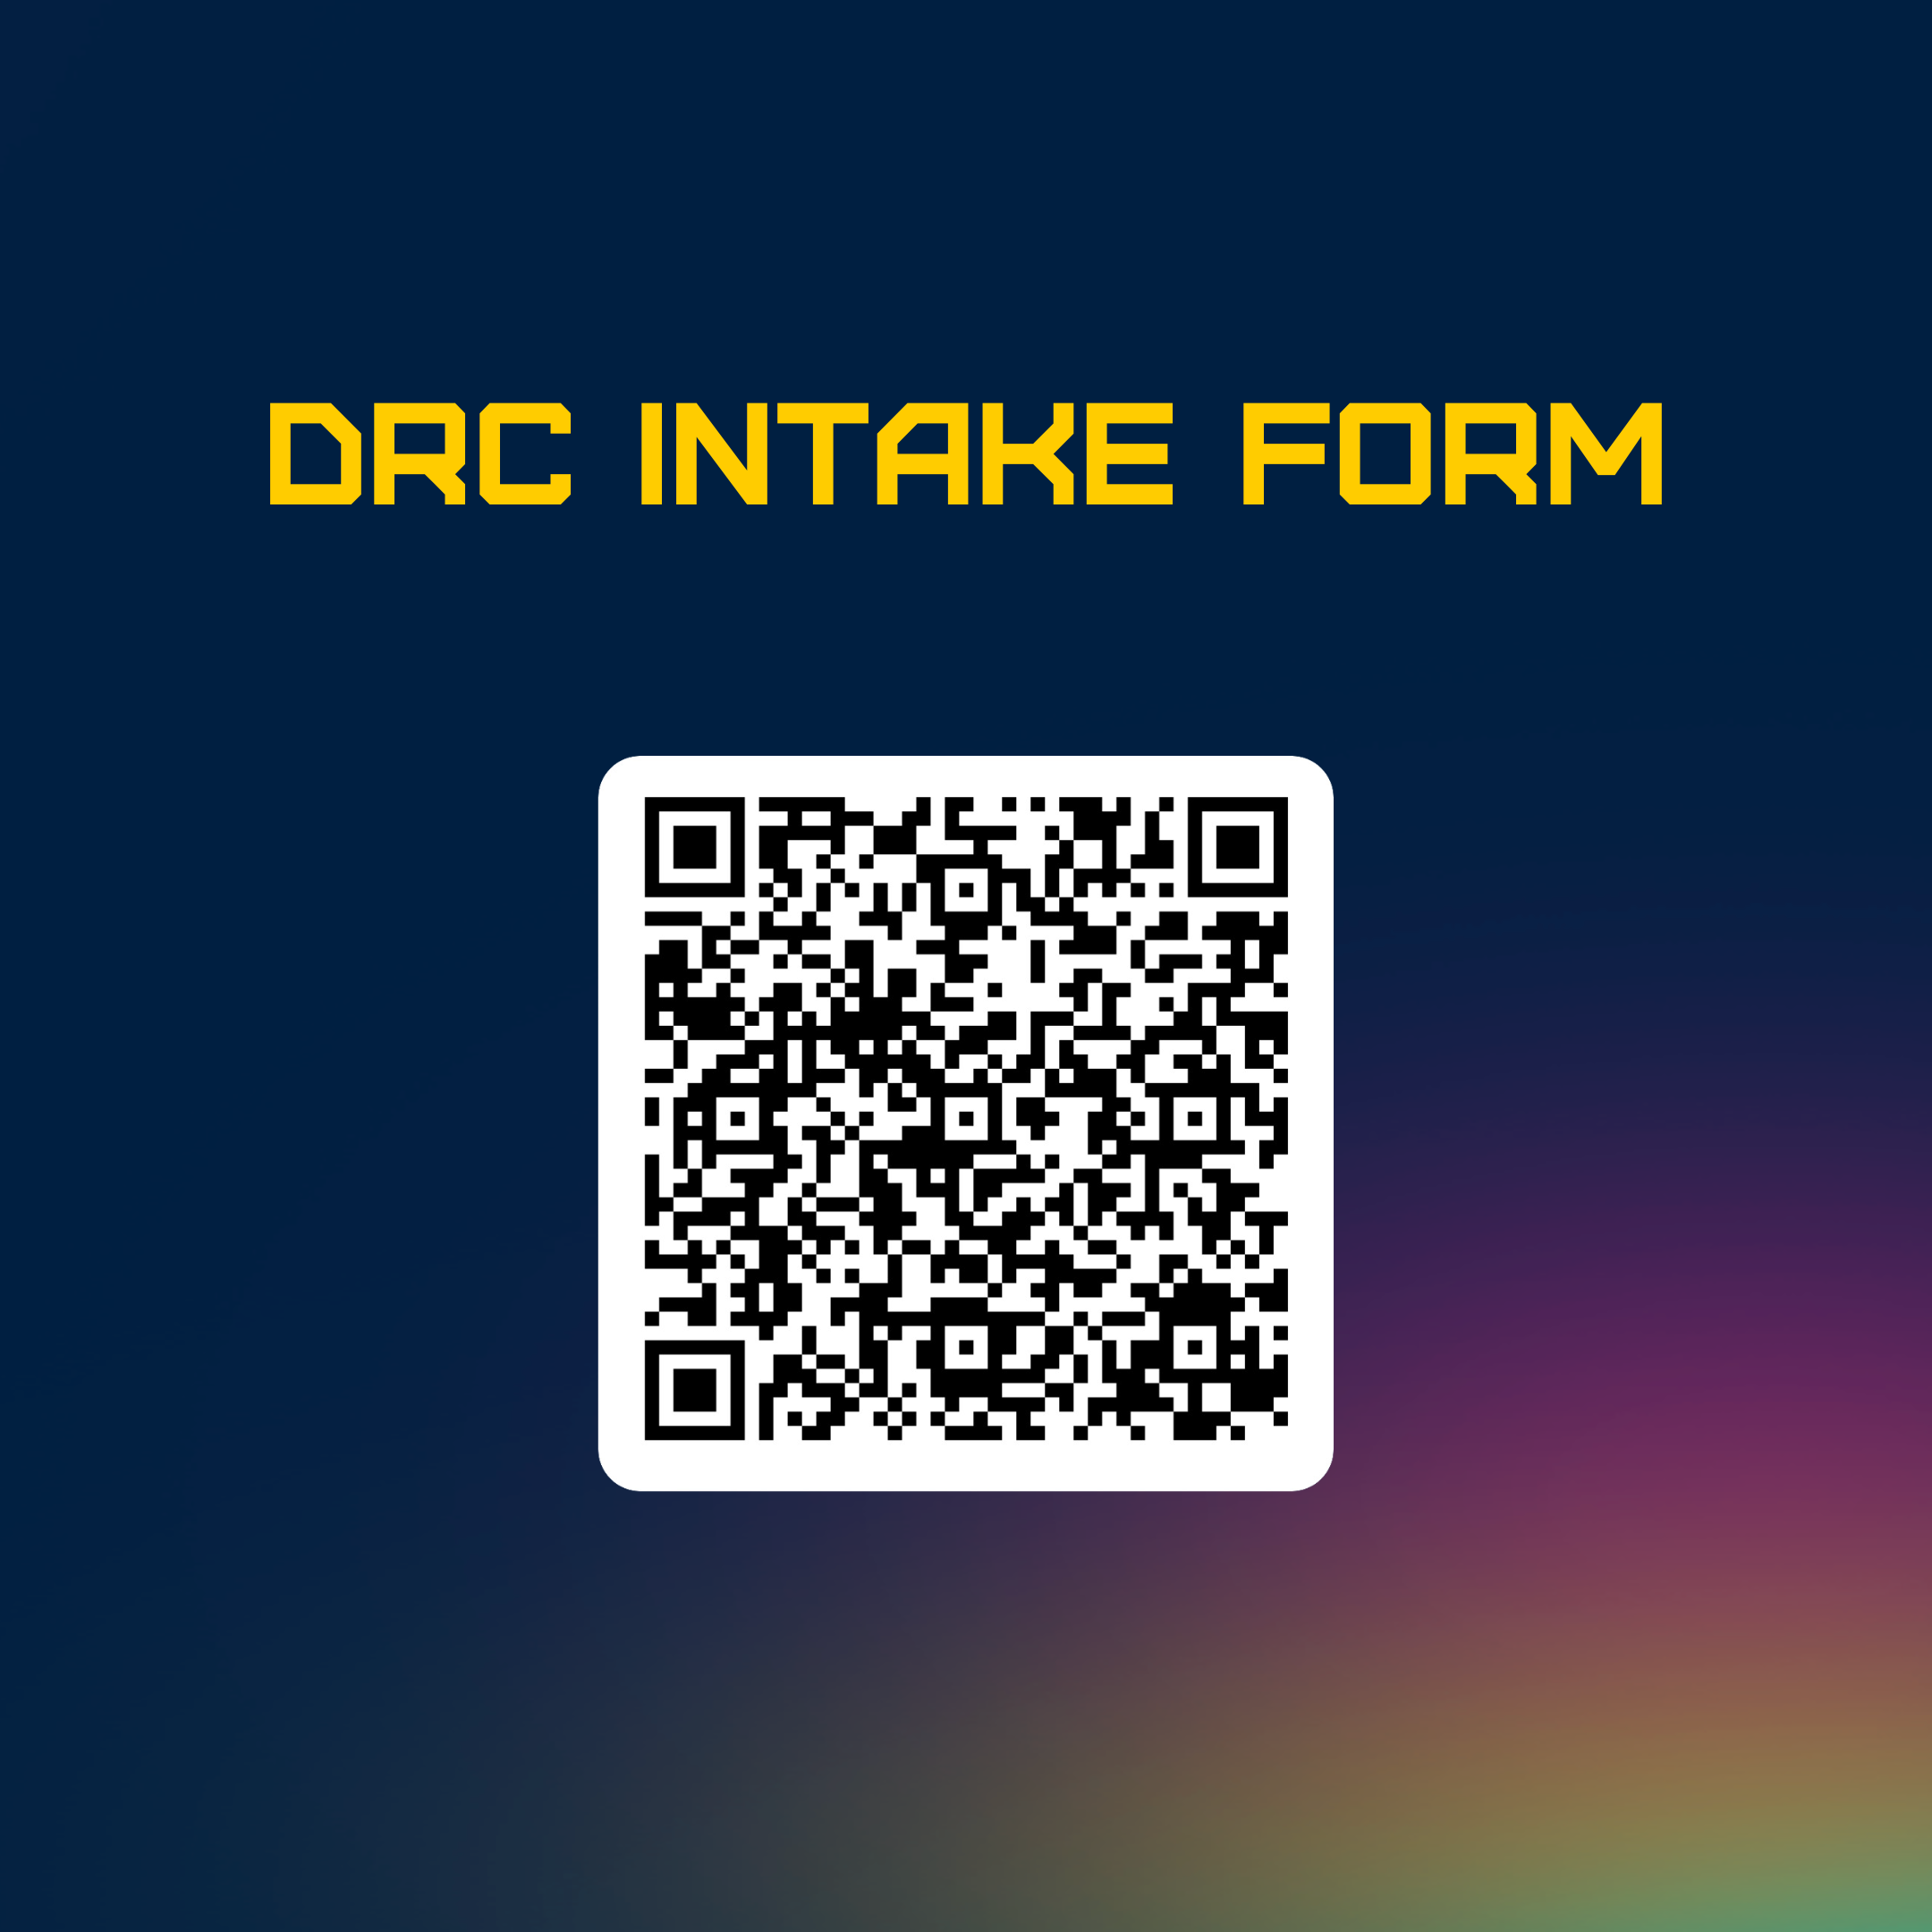 <b>1) Student Intake Form</b><br />
Complete the intake form by clicking on the image or by scanning the QR code below: